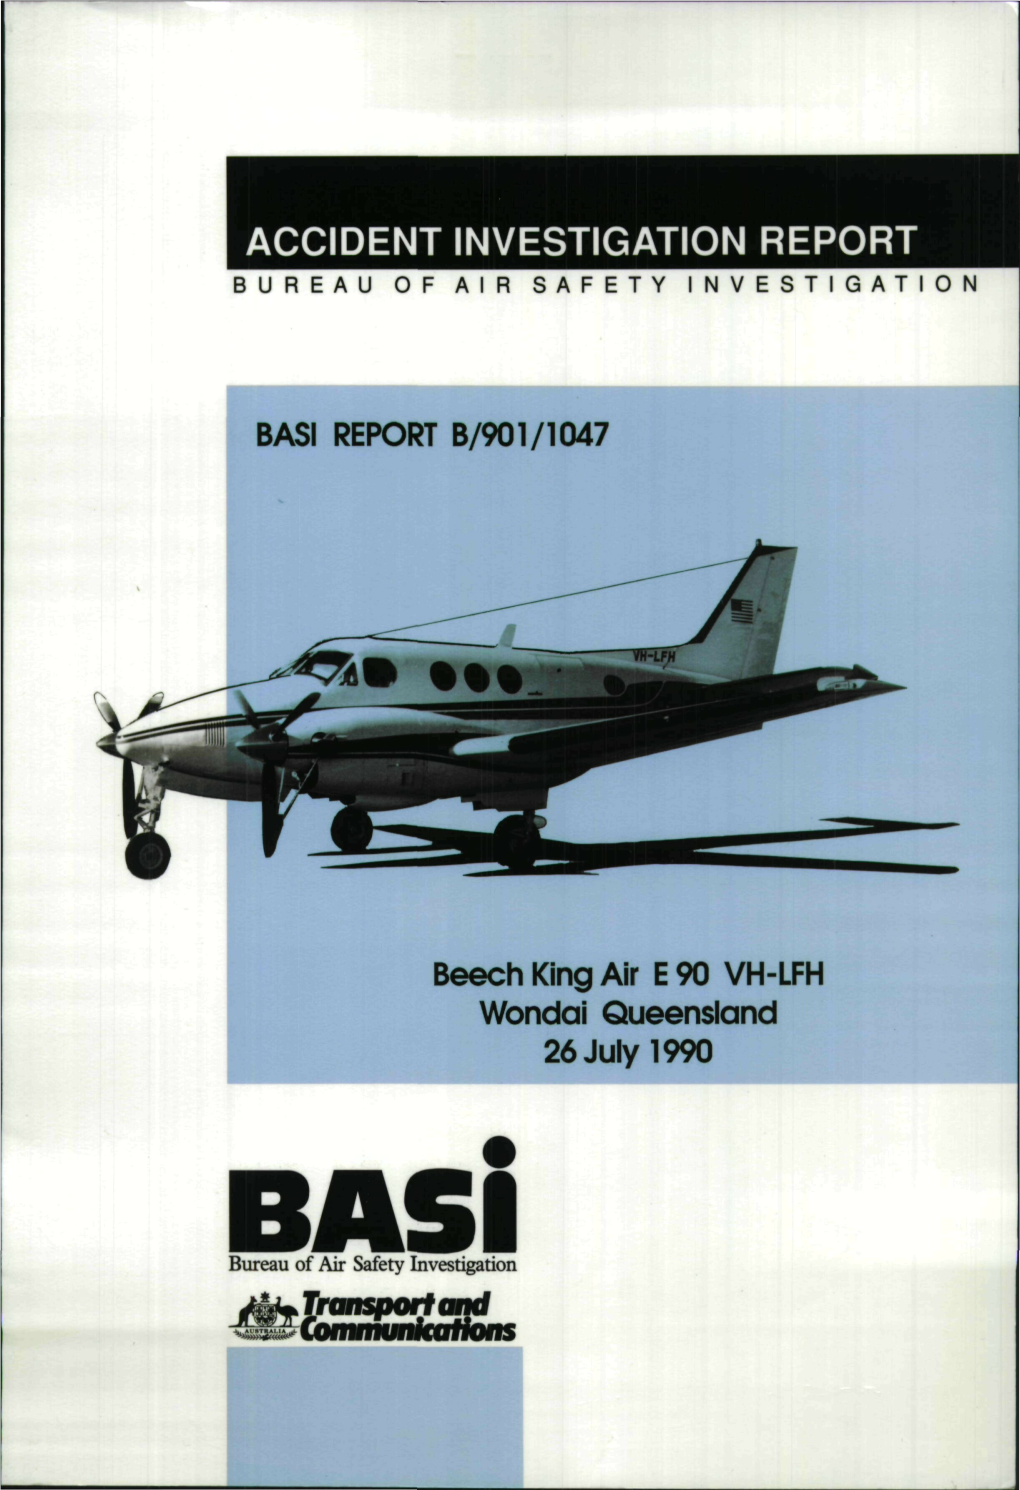 Accident Investigation Report Bureau of Air Safety Investigation